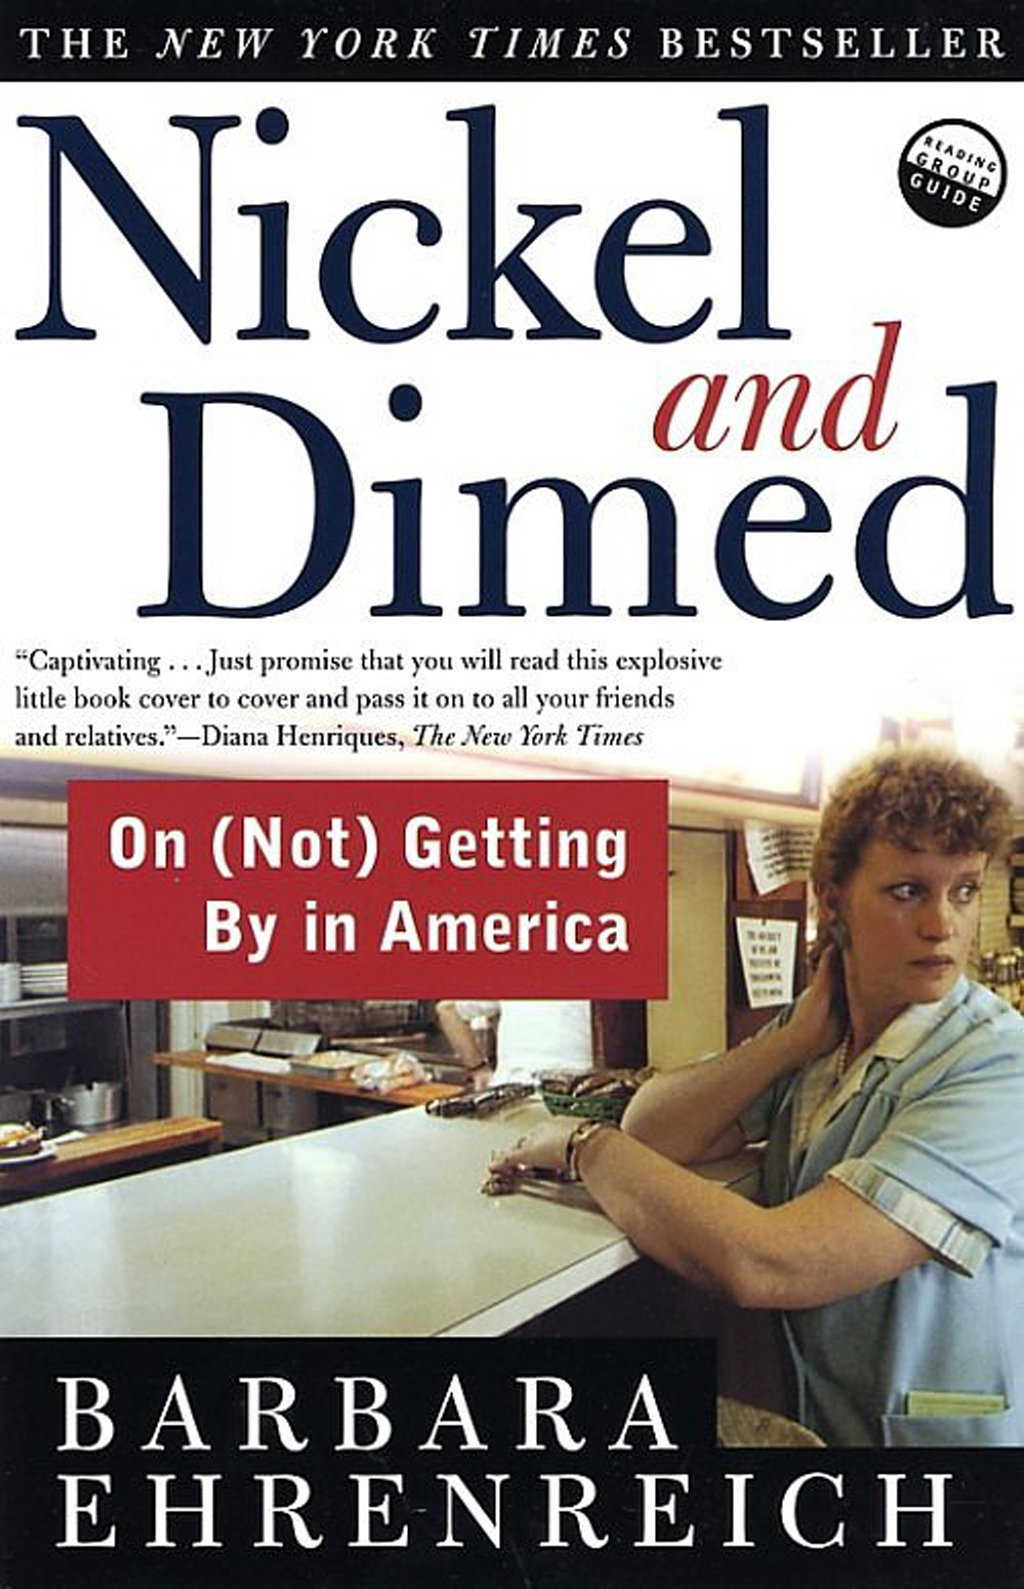 Nickel and Dimed — Best-selling author Barbara Ehrenreich details one of America’s primary problems: housing for low-income wage earners.